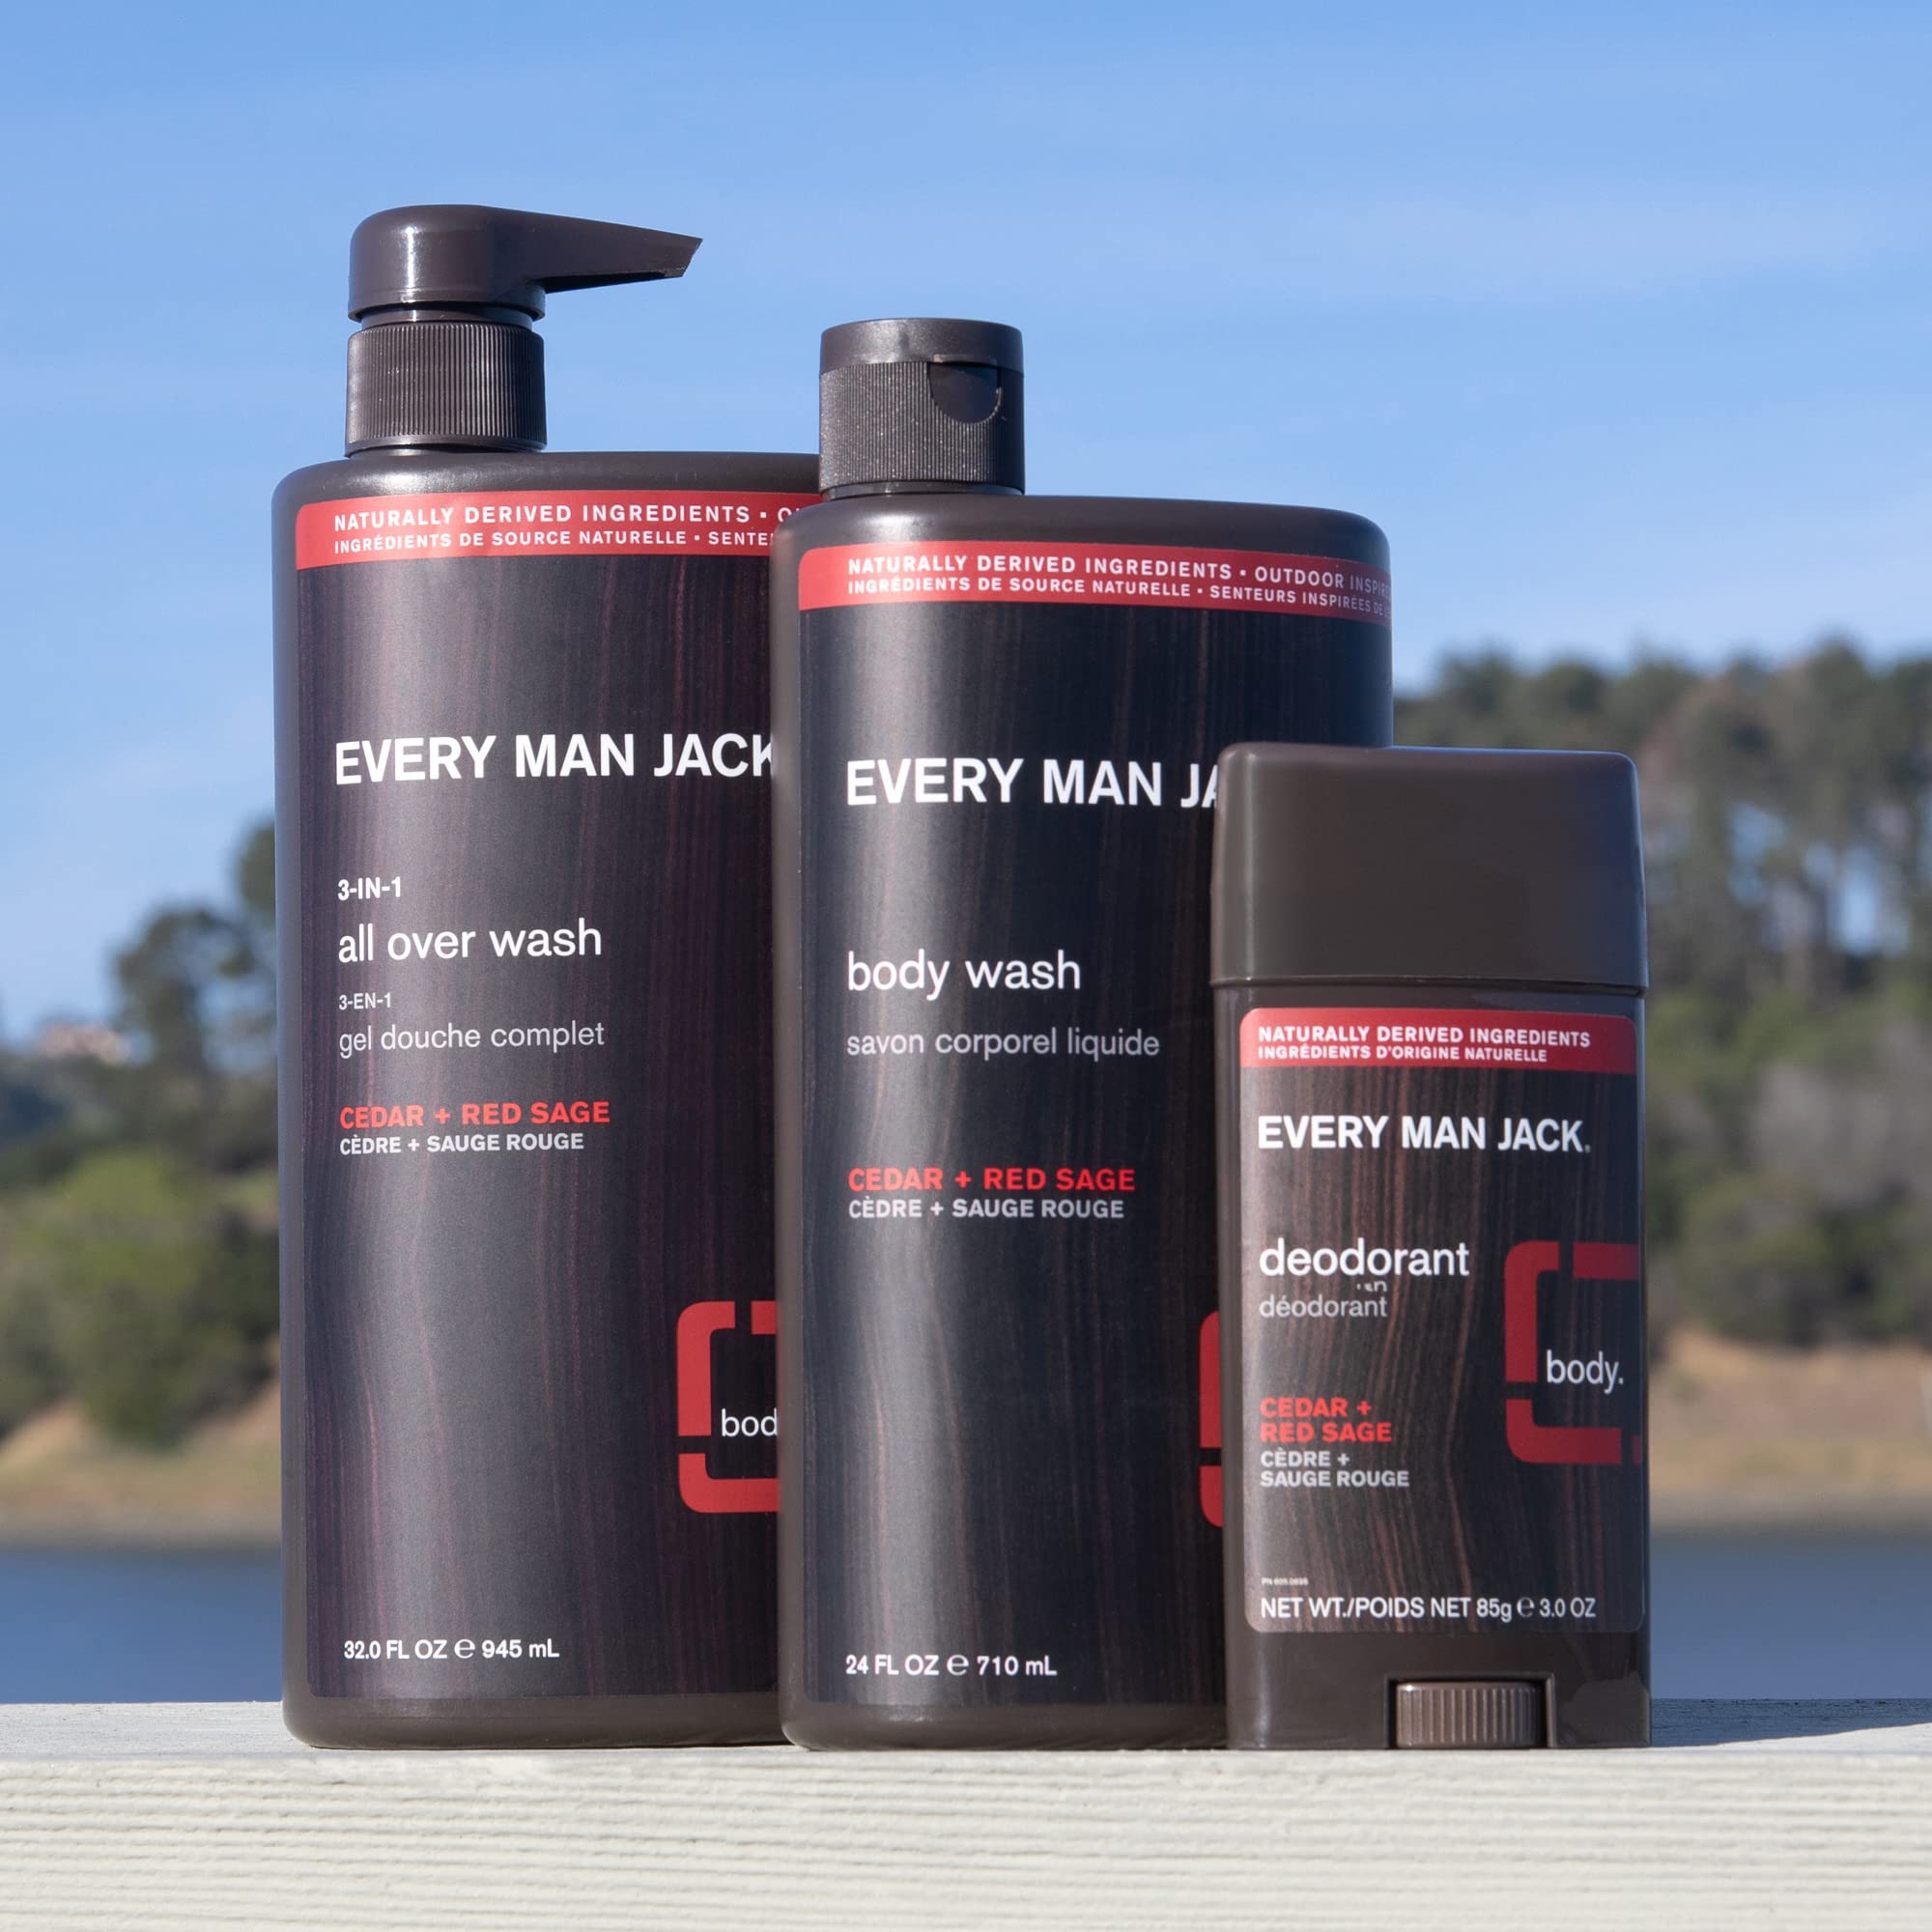 Every Man Jack Men’s All Over Wash + Deodorant Set - Cleanse All Skin Types and Fight Odors with Naturally Derived Ingredients and Cedar + Red Sage Scent - All Over Wash Twin Pack + Deo Twin Pack